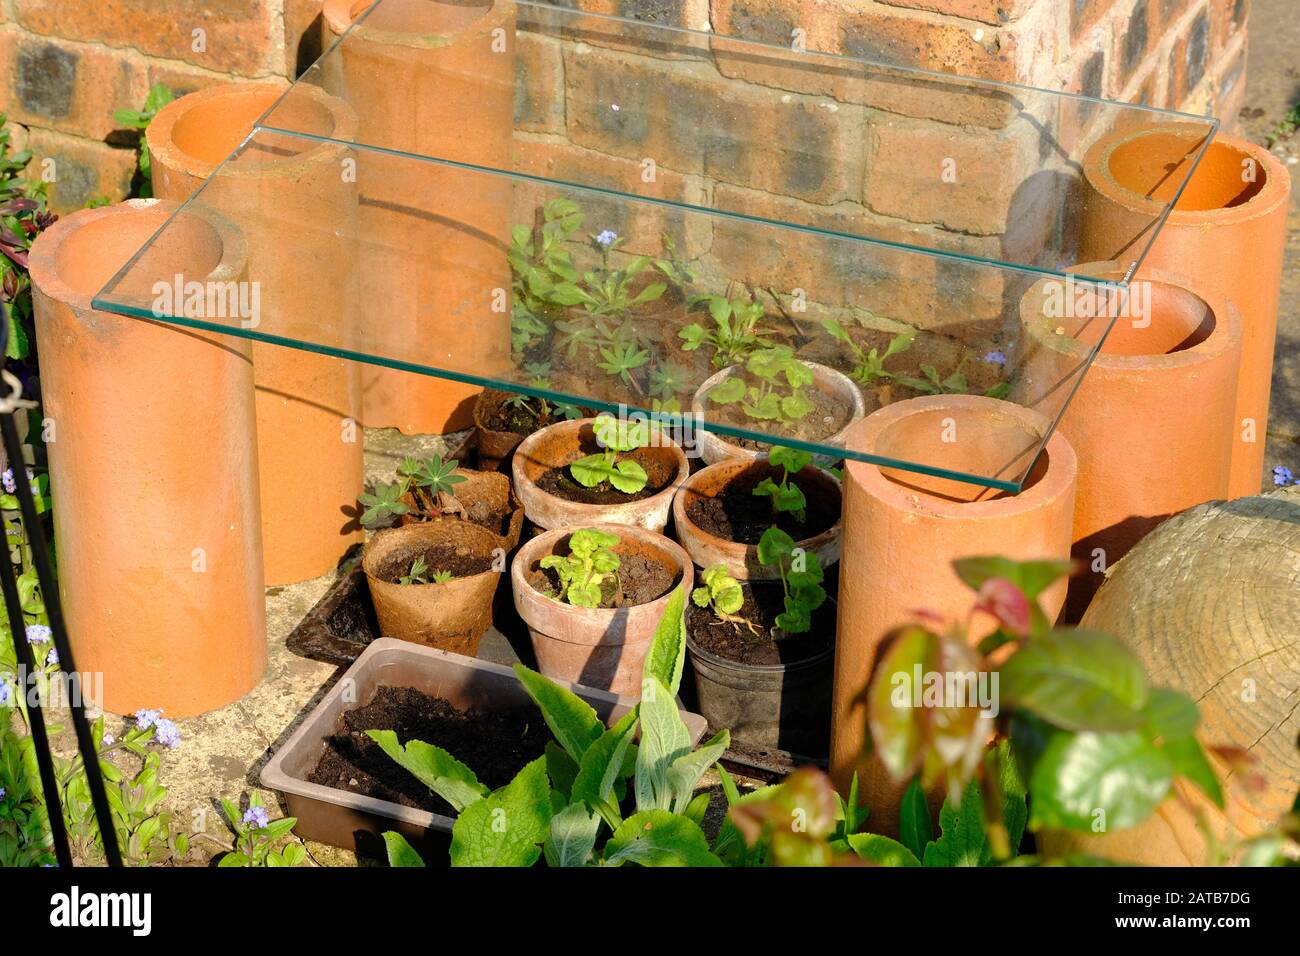 Bunbury, Cheshire, Temporary Cold Frame, English Country Garden, Land Drains. Glass, Plant Propagation. Stock Photo